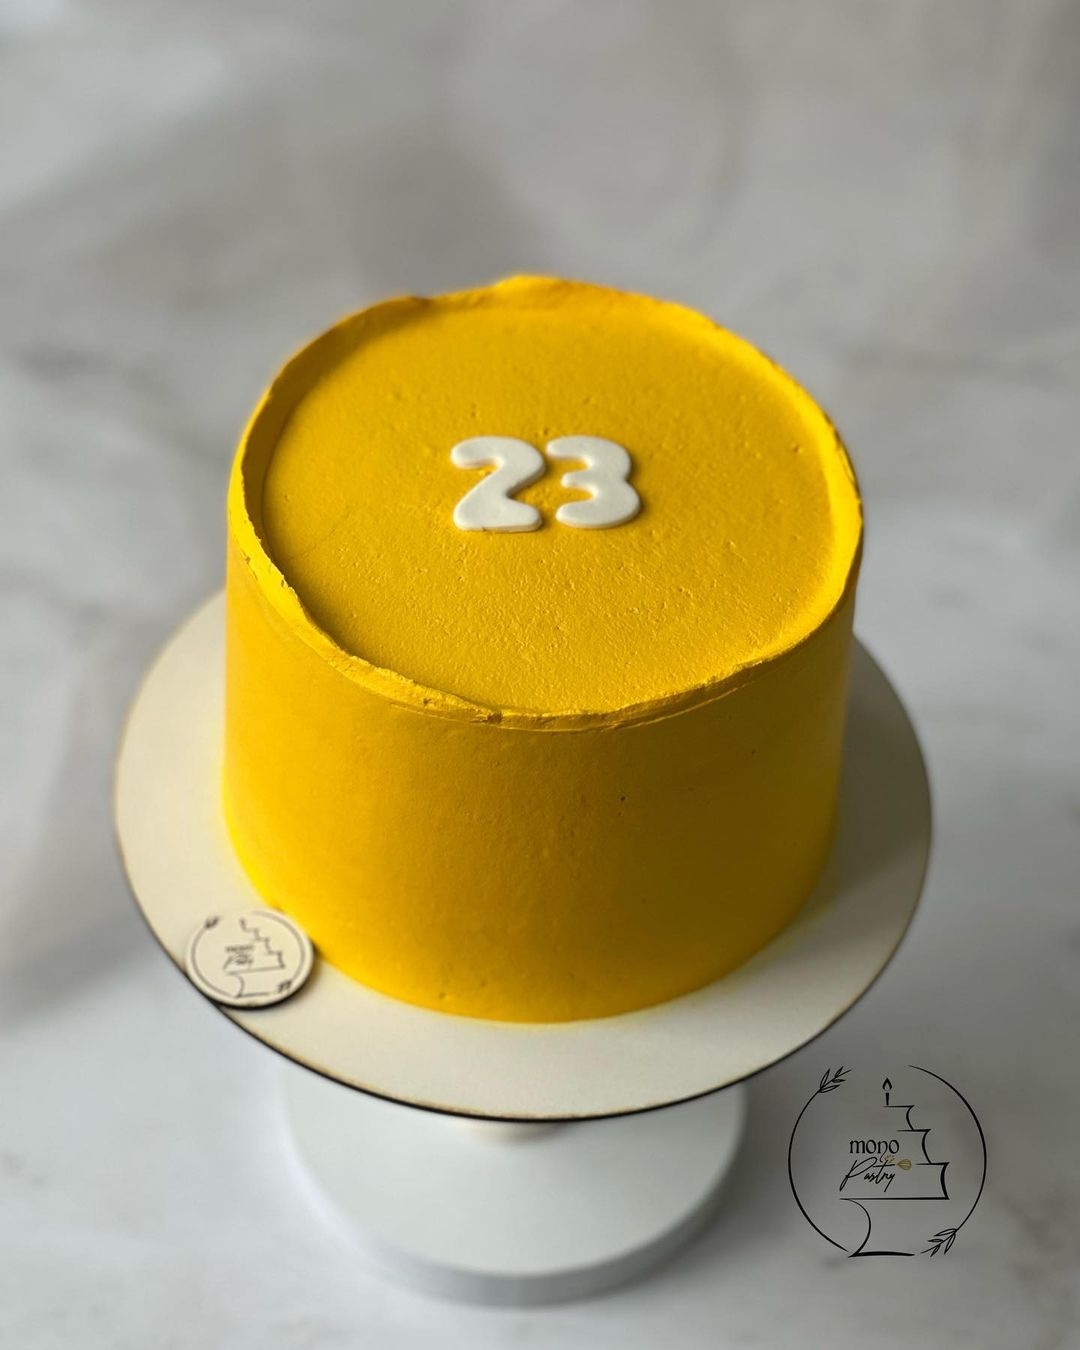 Simple, cute birthday cake ideas by mono.pastry